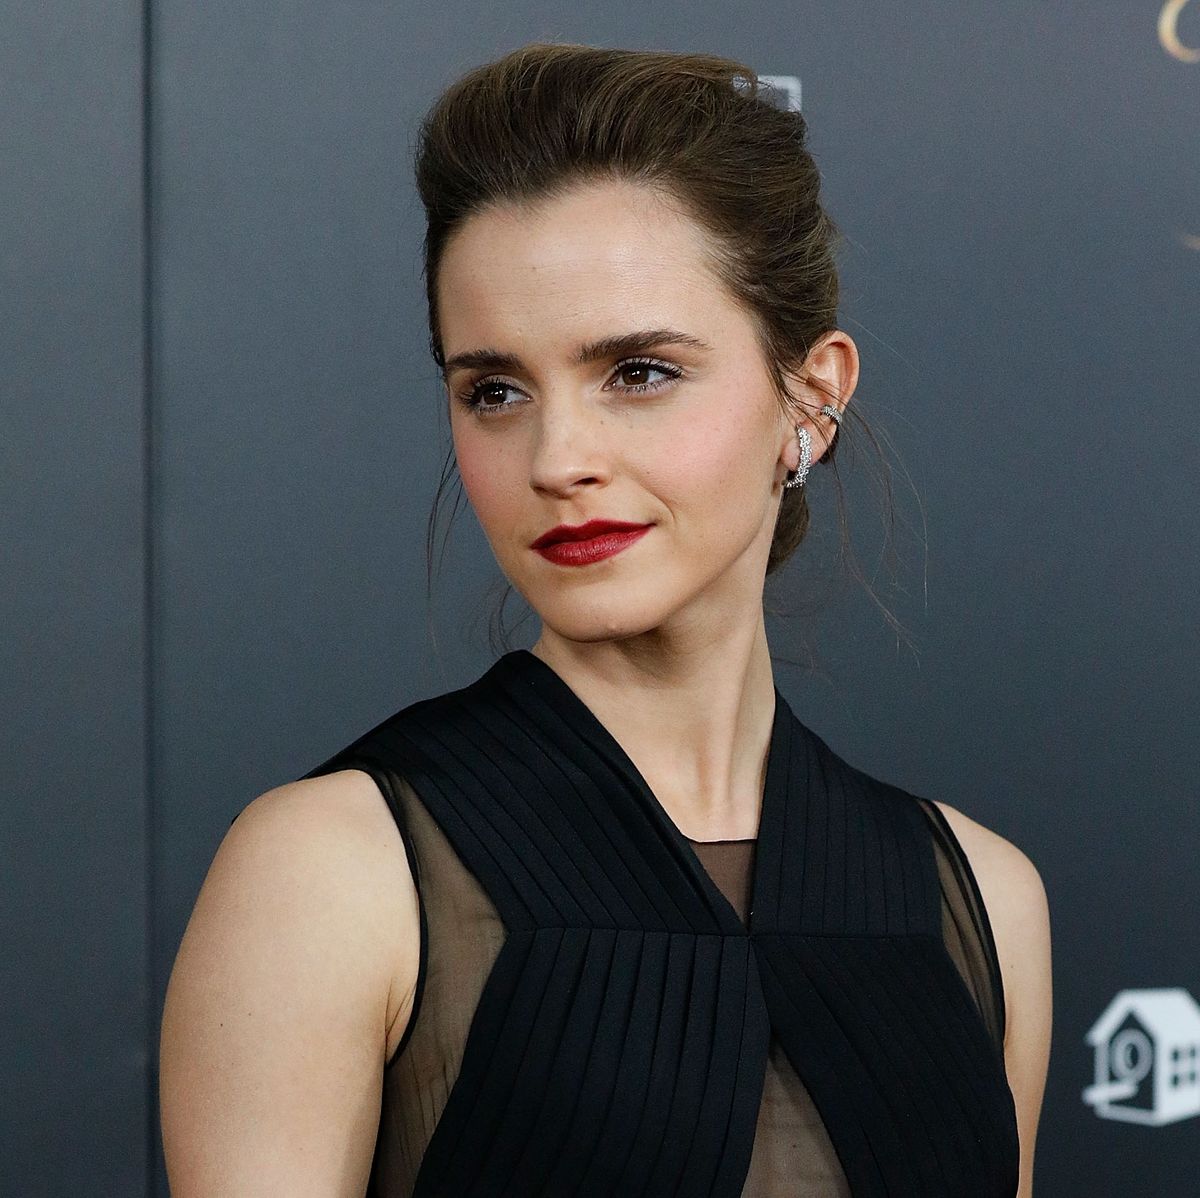 Emma Watson's Net Worth and 'Harry Potter' Earnings Will Shock You